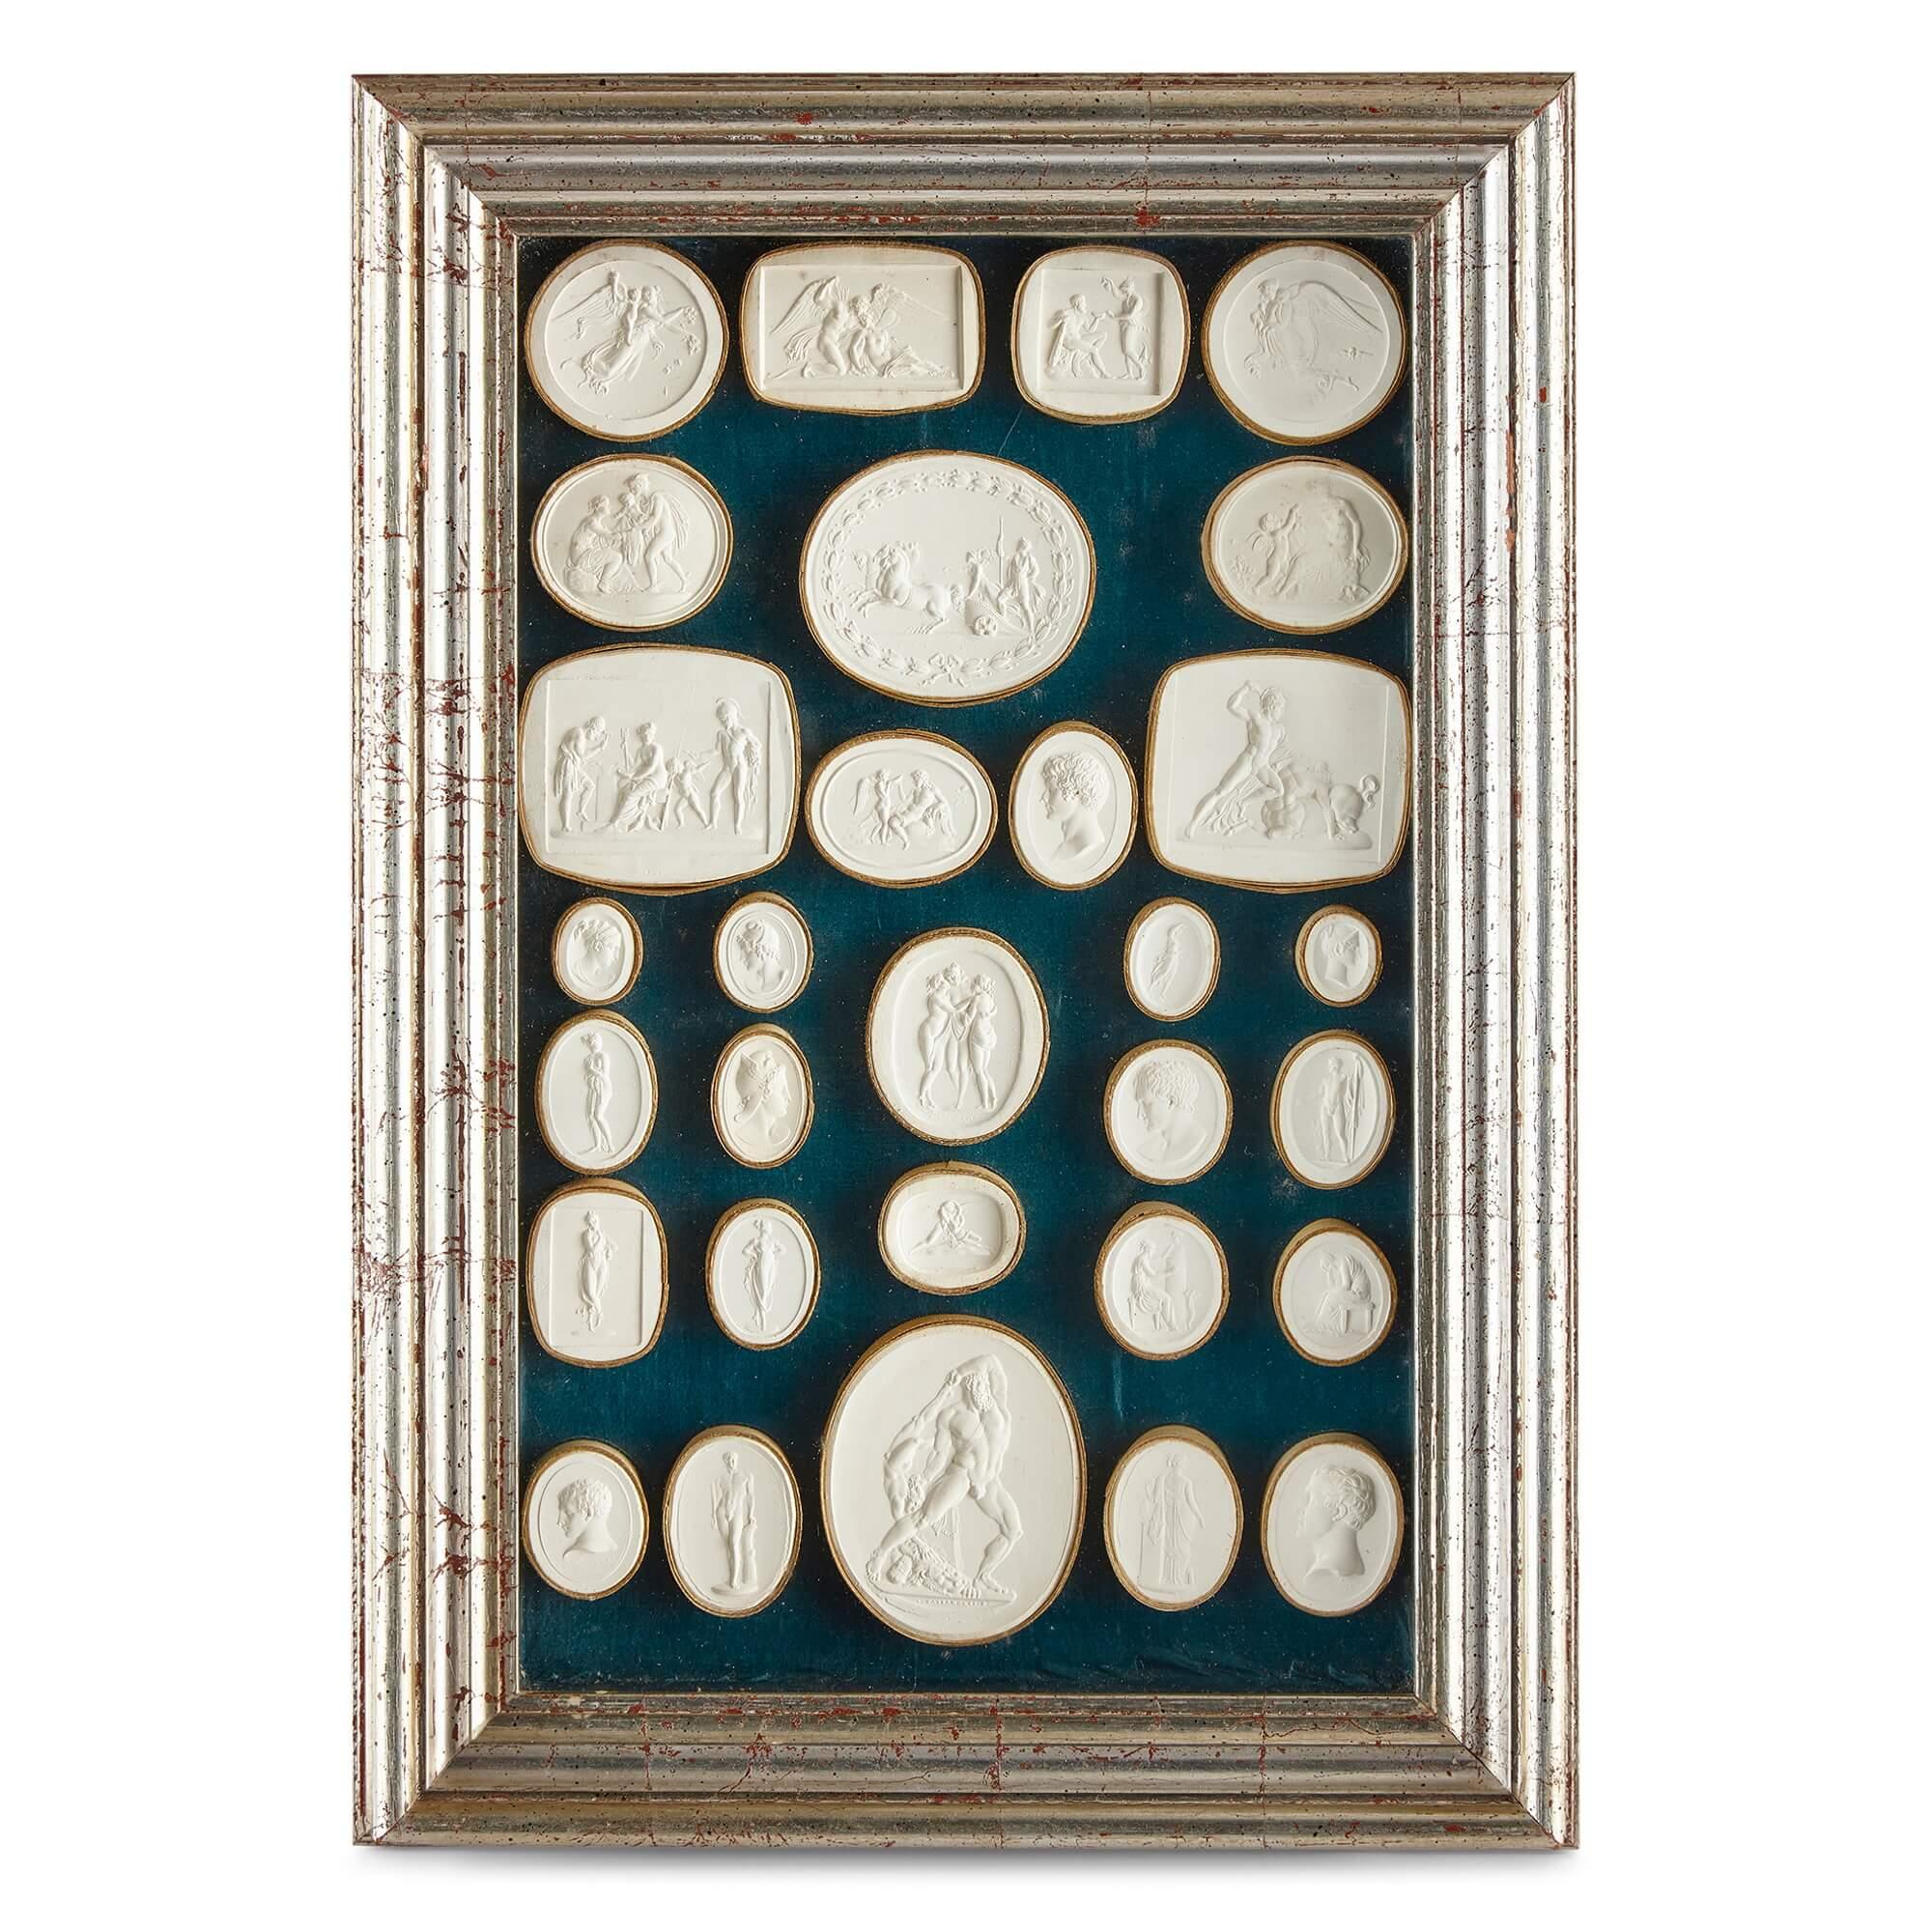 Antique collection of Italian Grand Tour plaster intaglios 
Italian, Early 19th Century 
Height 39.5cm, width 27cm, depth 5cm

Consisting of around 200 plaster intaglios, this collection is a memento of one’s travels during the Grand Tour, a popular